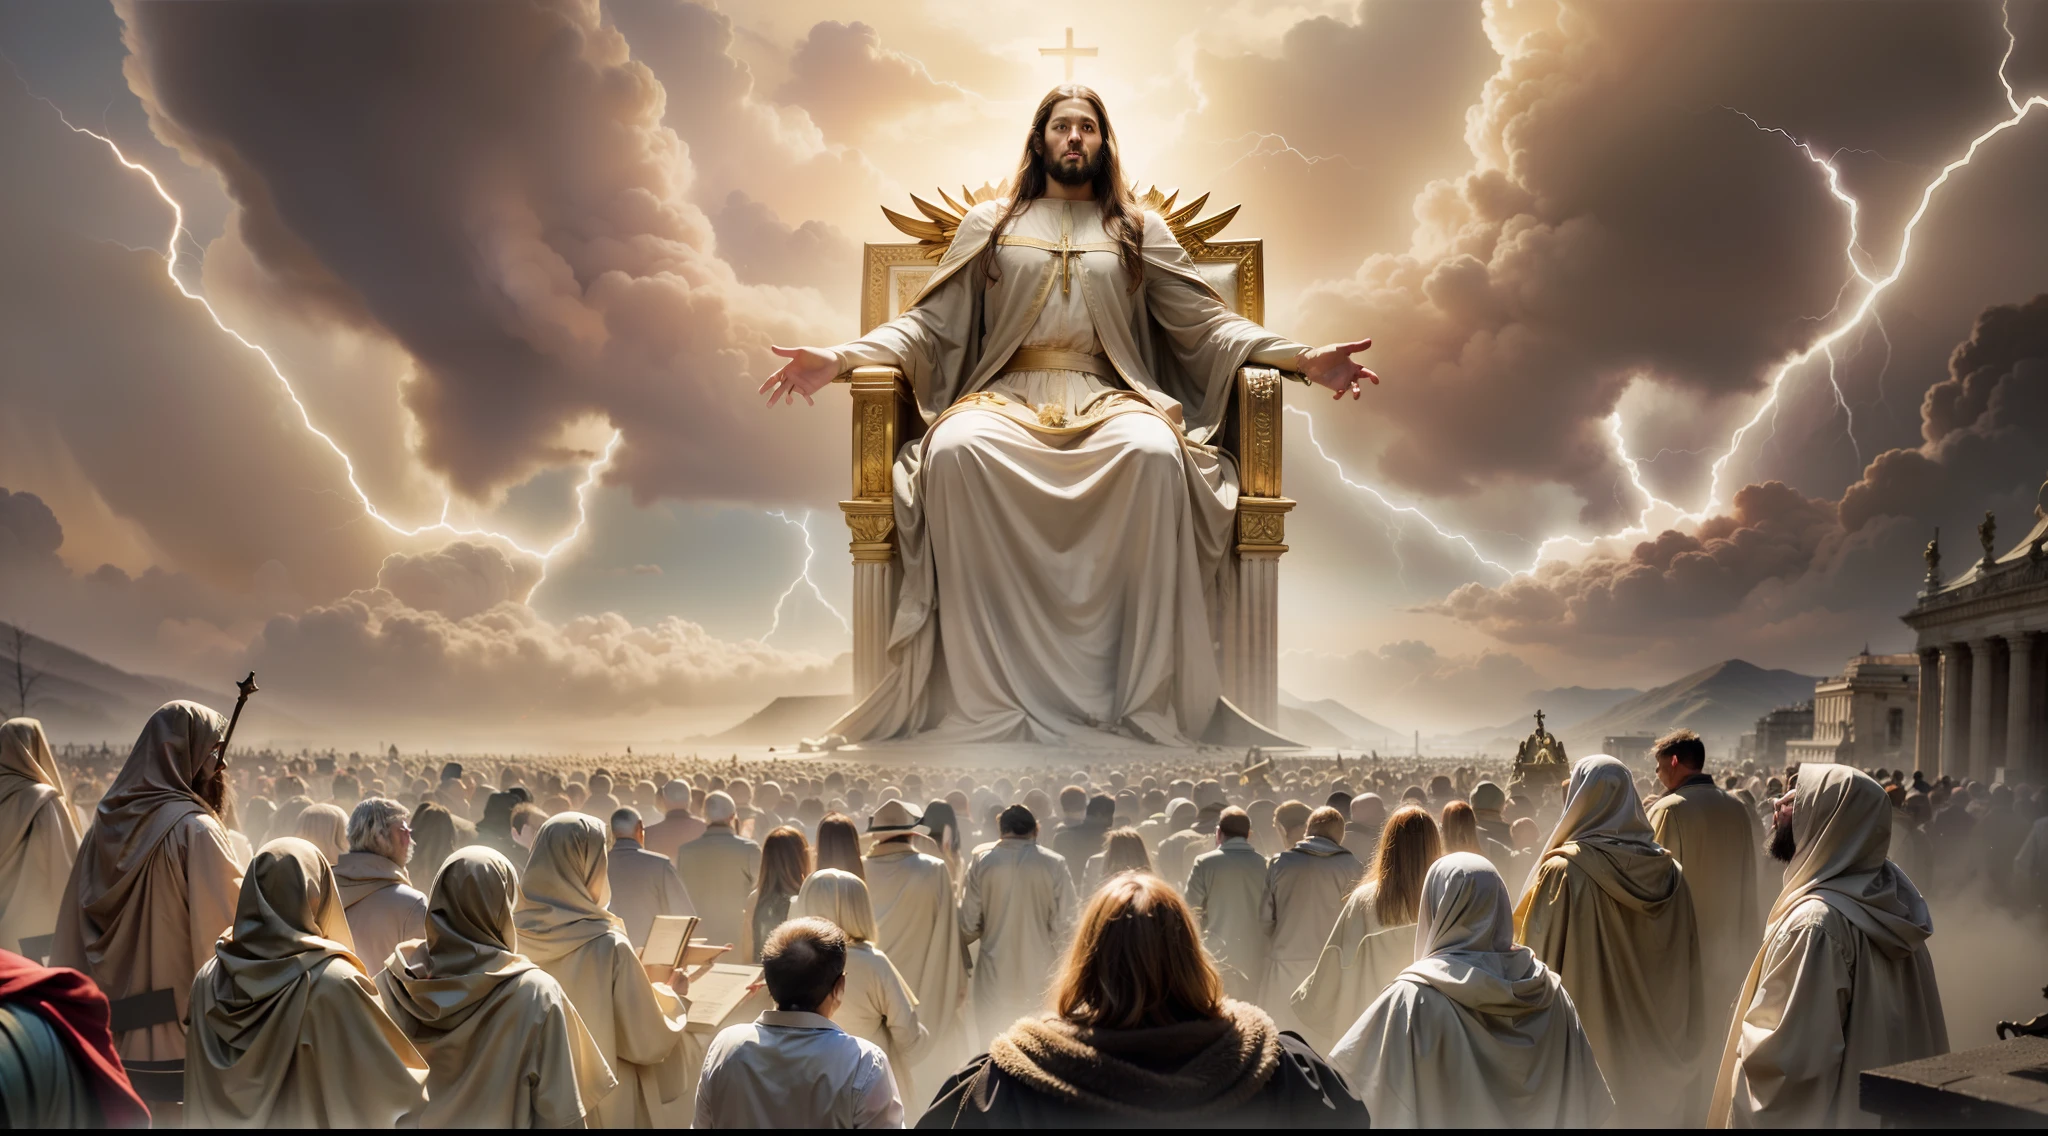 A stunning image depicting the Doomsday scenario, conforme descrito em Apocalipse 20:11. O trono branco onde Jesus se senta se destaca no centro da cena, surrounded by white clouds and lightning, simbolizando a majestade divina. Powerful angels are present, solemnly watching the opening of the books, representing the records of each individual's actions. an untold crowd of people, aguardando seu destino eterno. The mood is one of reverence and awe before the divine justice that will be established.